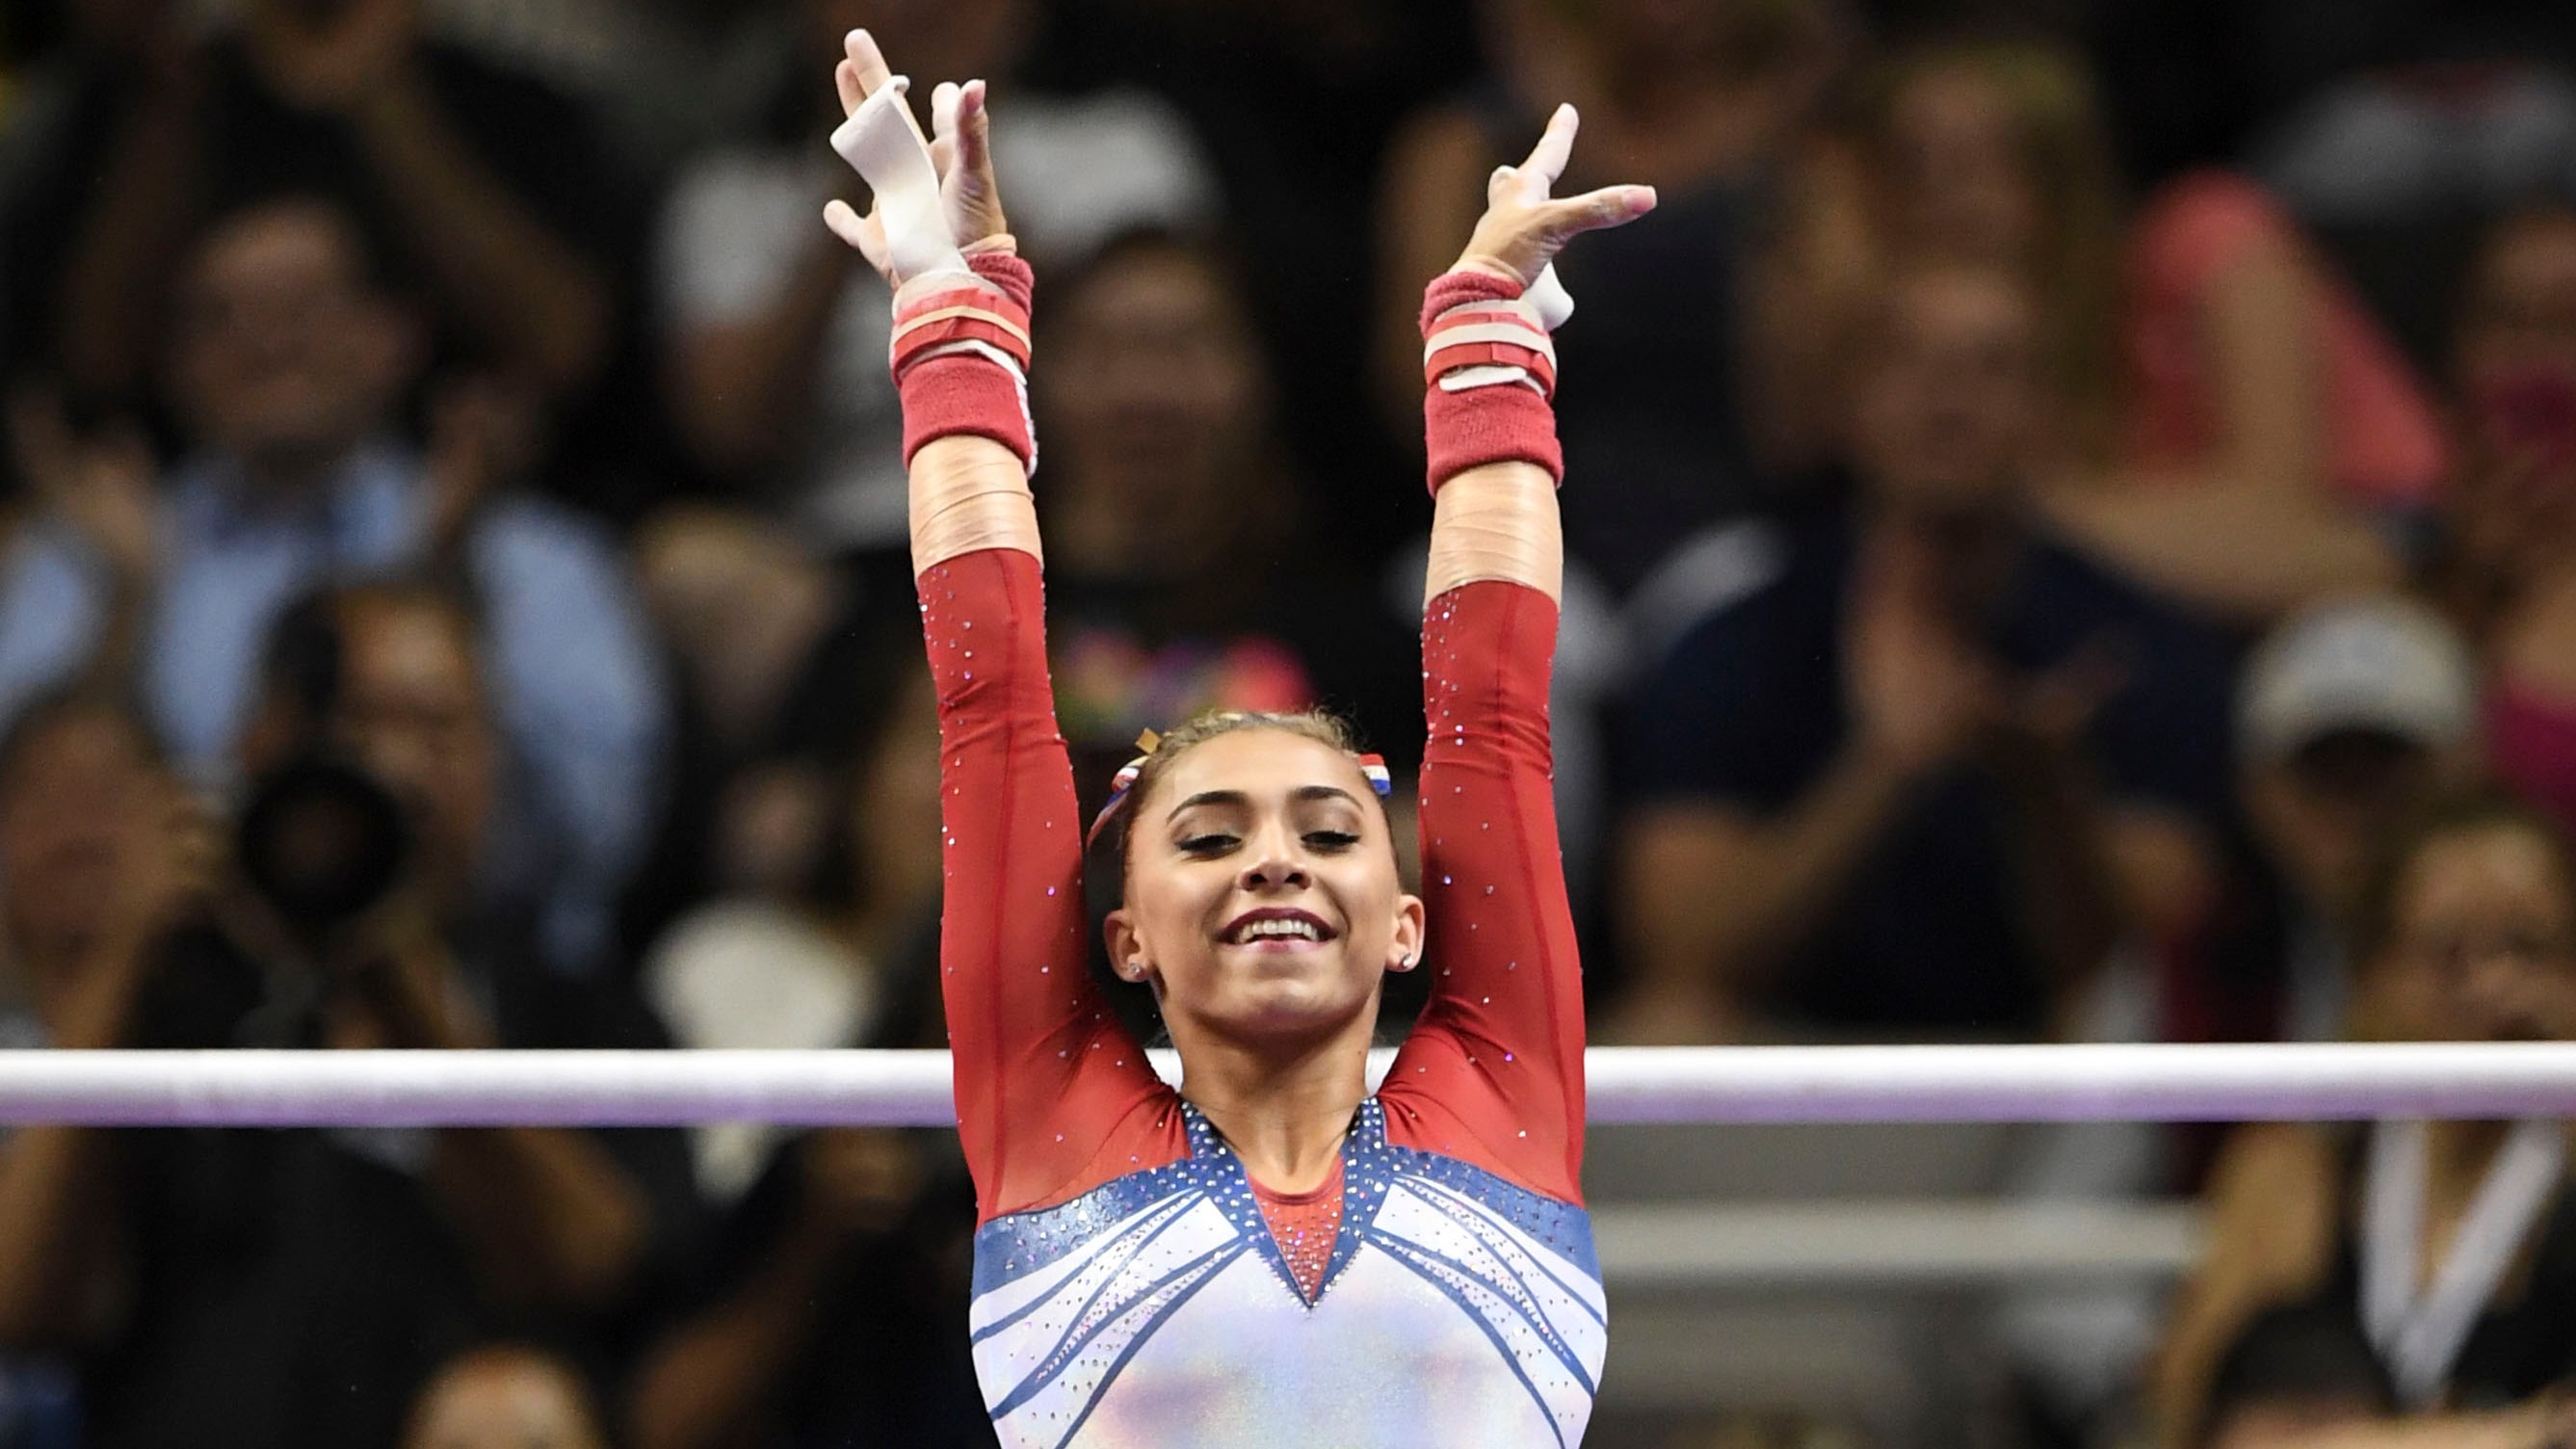 Unsurprisingly, Ashton Locklear maintained her place as the execution queen...